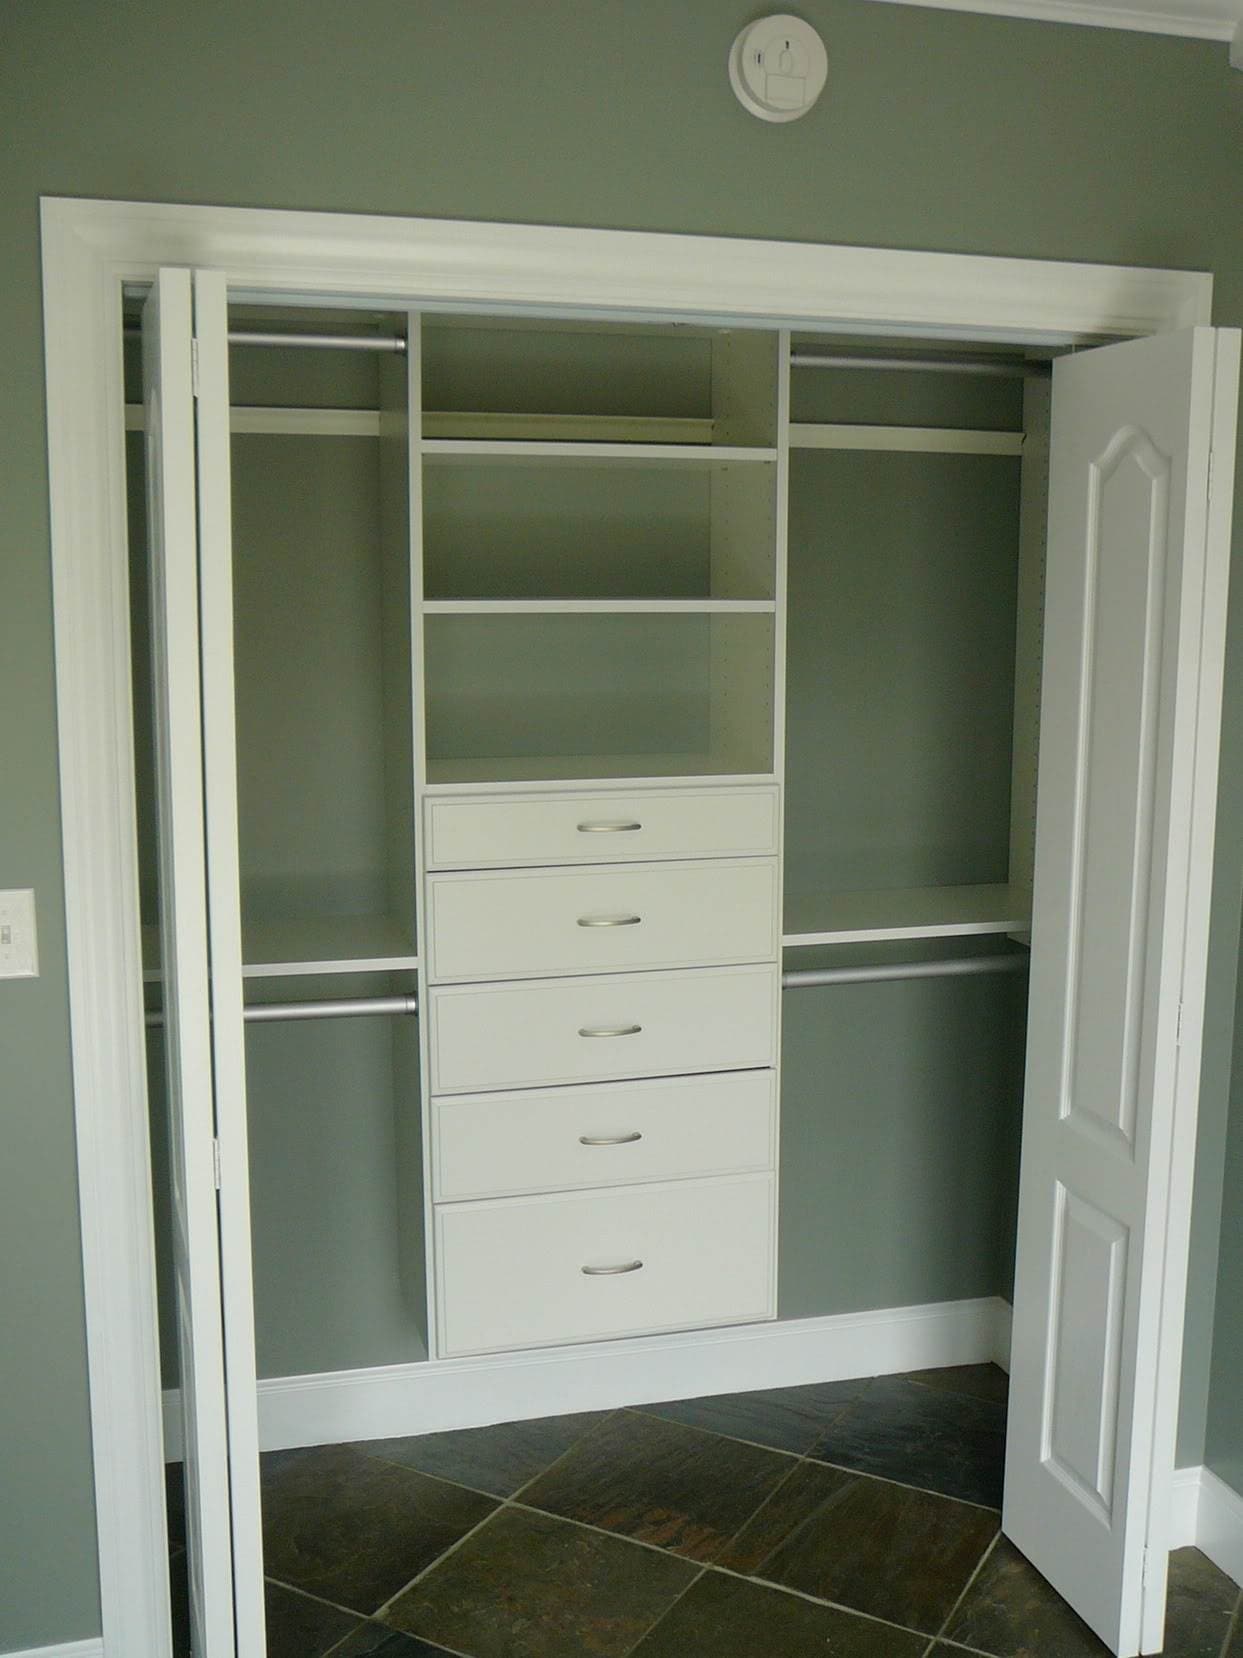 Space Closet Storage Systems